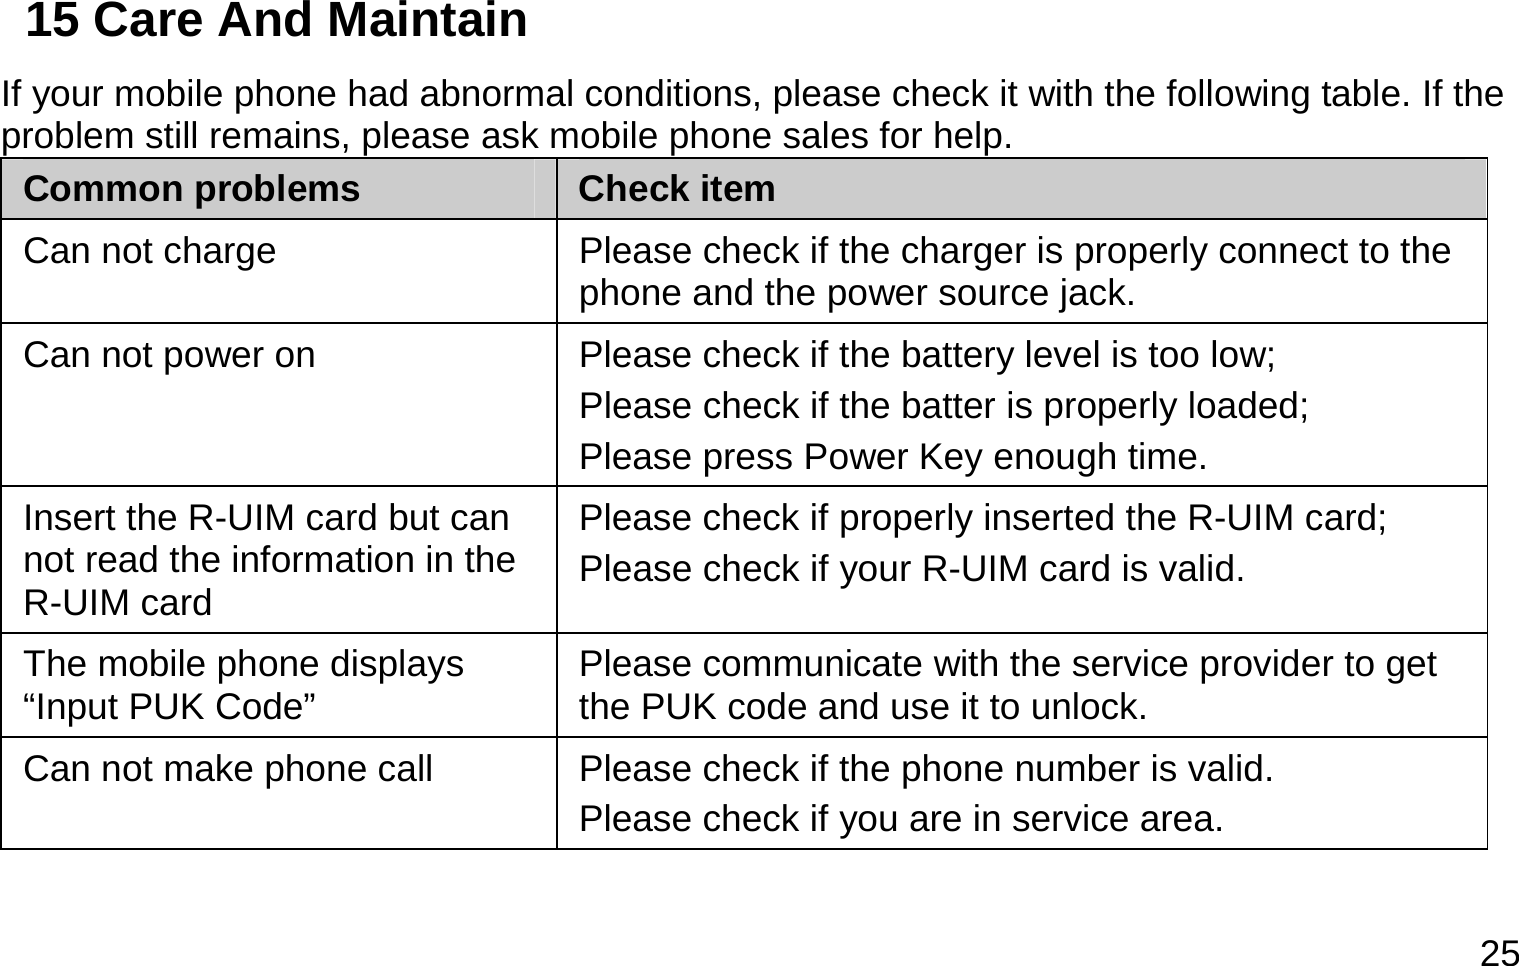  25 15 Care And Maintain If your mobile phone had abnormal conditions, please check it with the following table. If the problem still remains, please ask mobile phone sales for help. Common problems  Check item Can not charge  Please check if the charger is properly connect to the phone and the power source jack.   Can not power on  Please check if the battery level is too low; Please check if the batter is properly loaded;   Please press Power Key enough time. Insert the R-UIM card but can not read the information in the R-UIM card Please check if properly inserted the R-UIM card; Please check if your R-UIM card is valid.   The mobile phone displays “Input PUK Code”  Please communicate with the service provider to get the PUK code and use it to unlock. Can not make phone call  Please check if the phone number is valid.   Please check if you are in service area.   